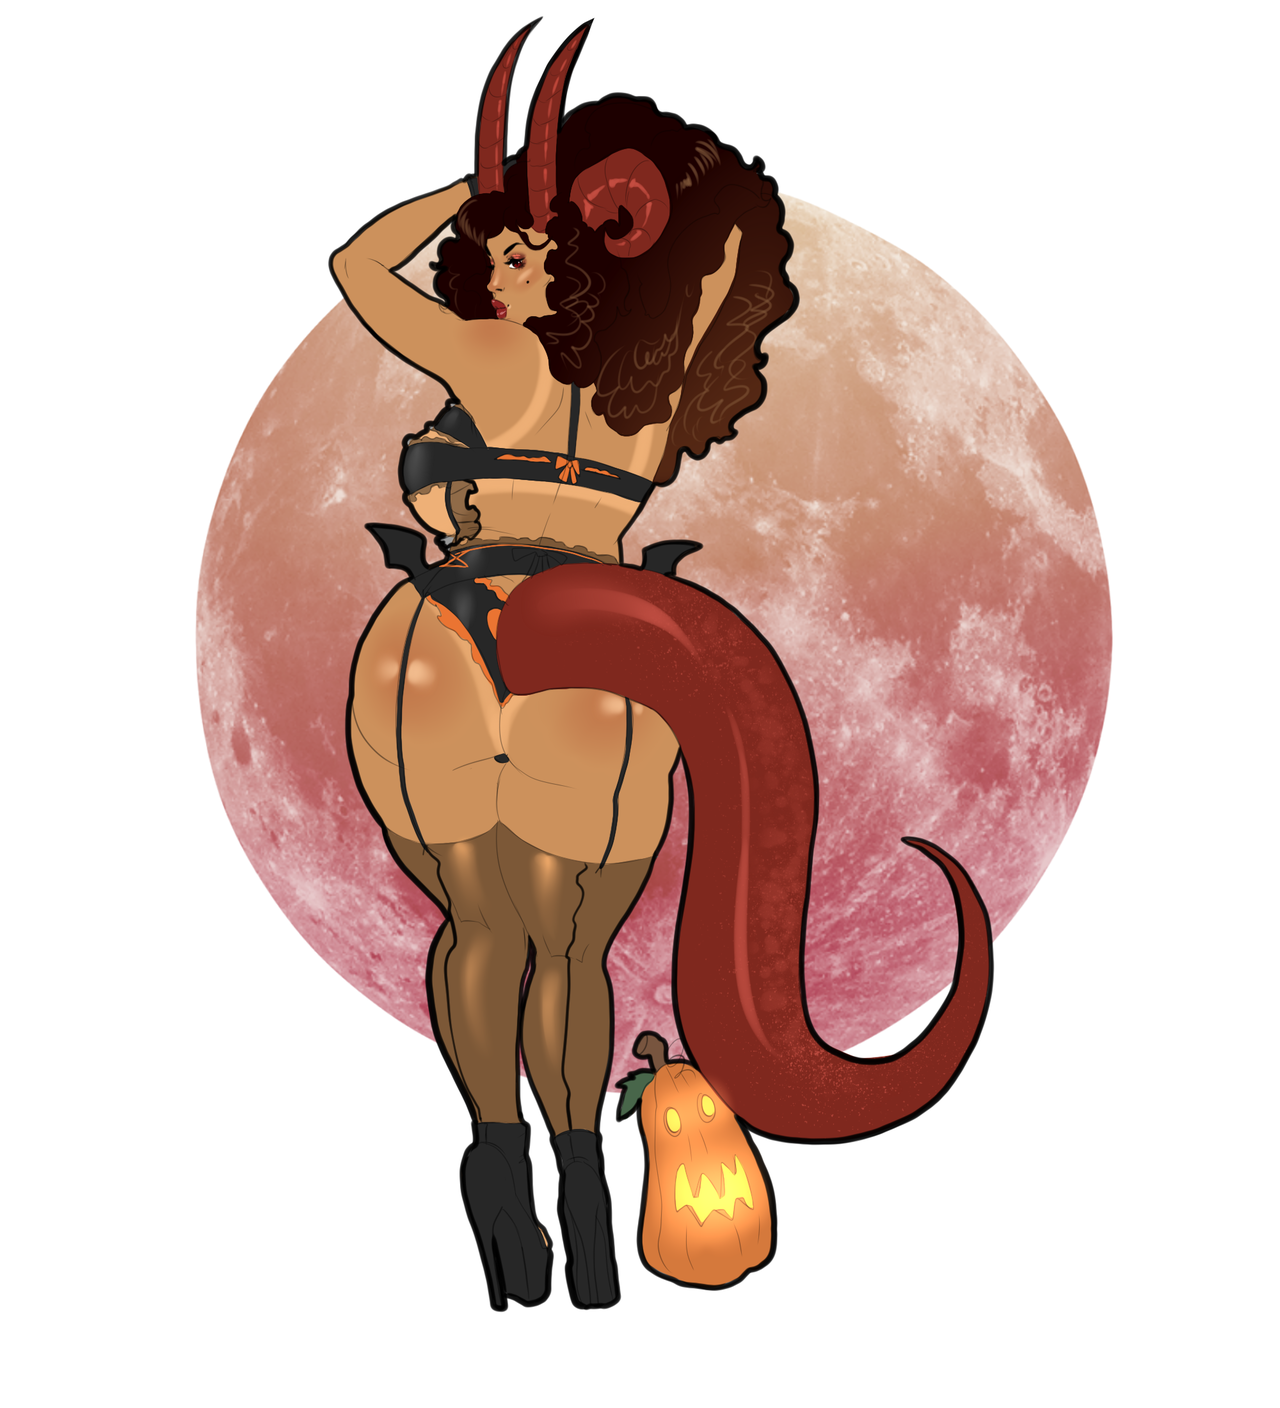   More Halloween Lingerie! Character belongs to respective owner! She&rsquo;s